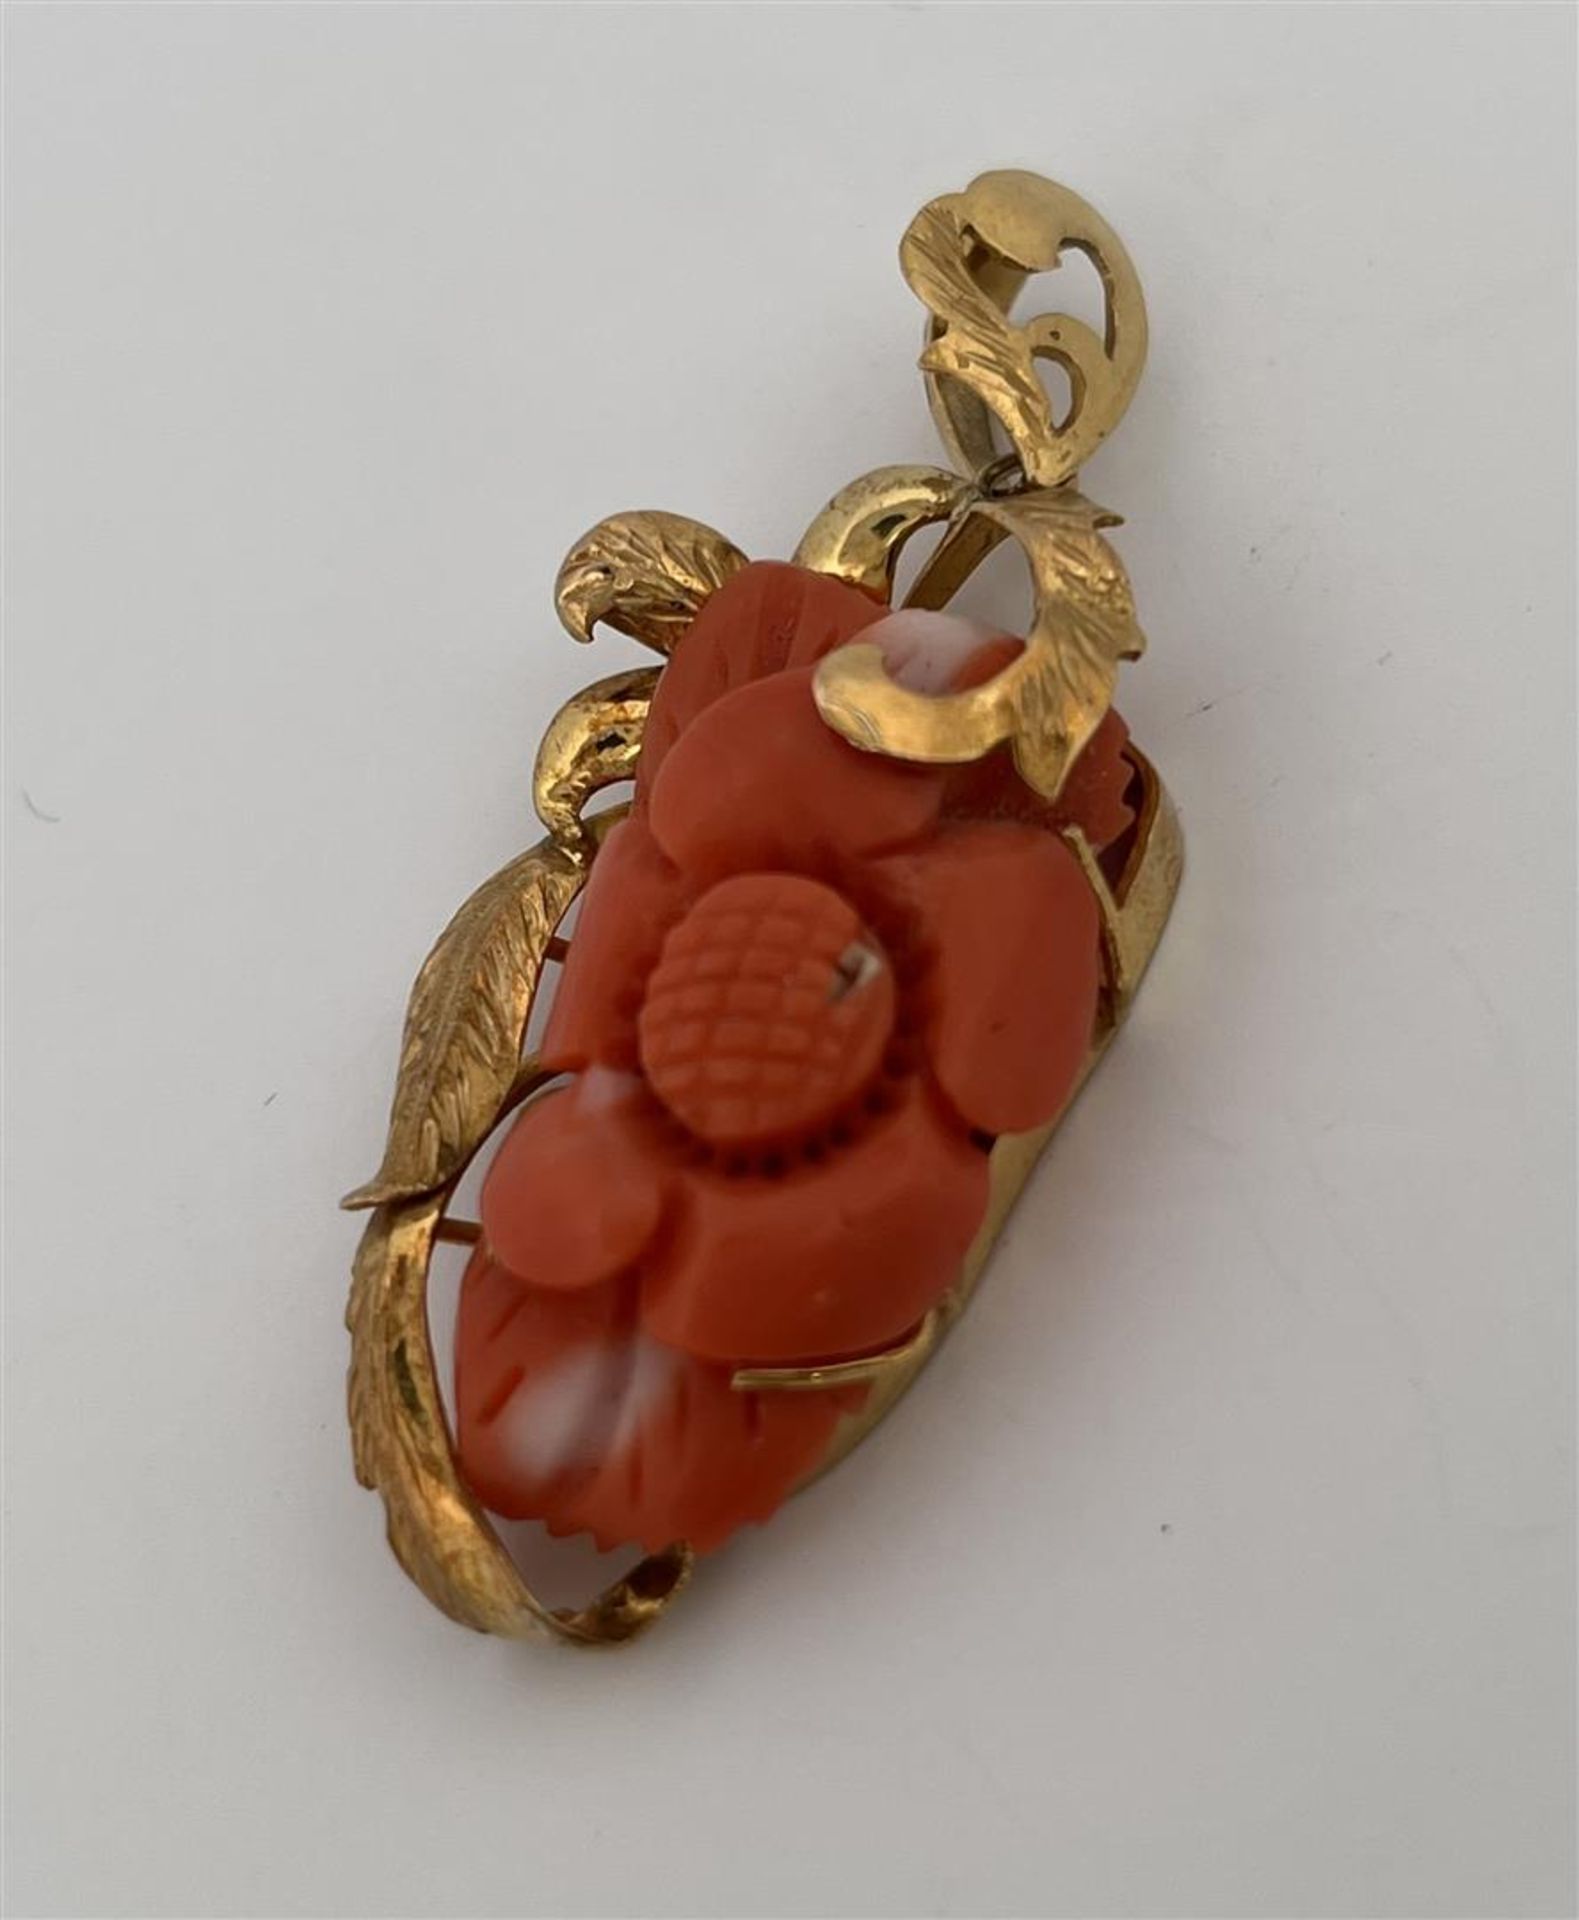 18kt yellow gold pendant set with carved coral.
The pendant is set with a beautiful carved coral in 